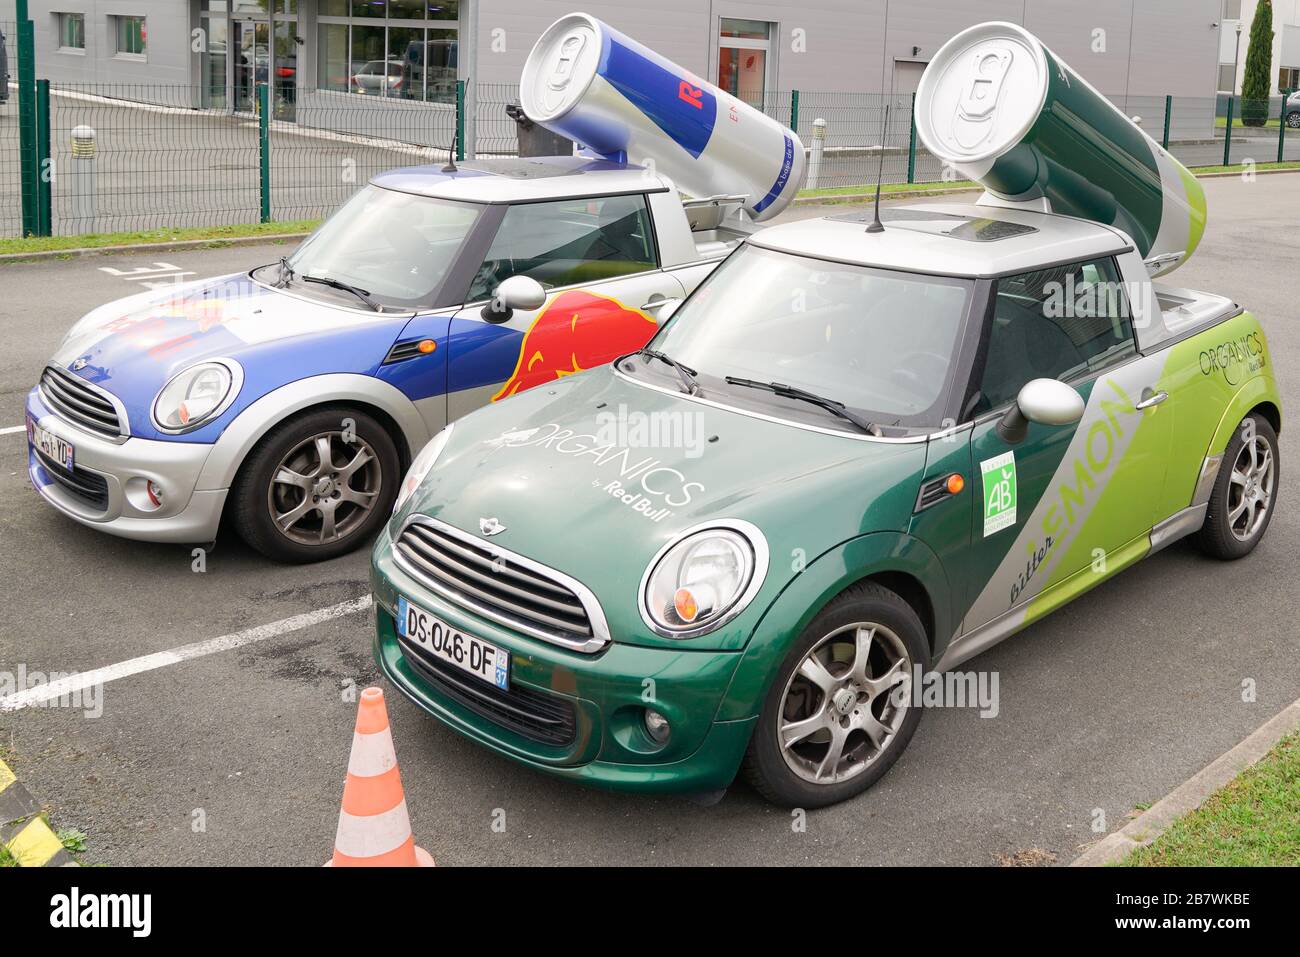 A blue / red / gray Red Bull print pattern Mini Cooper car, outside News  Photo - Getty Images